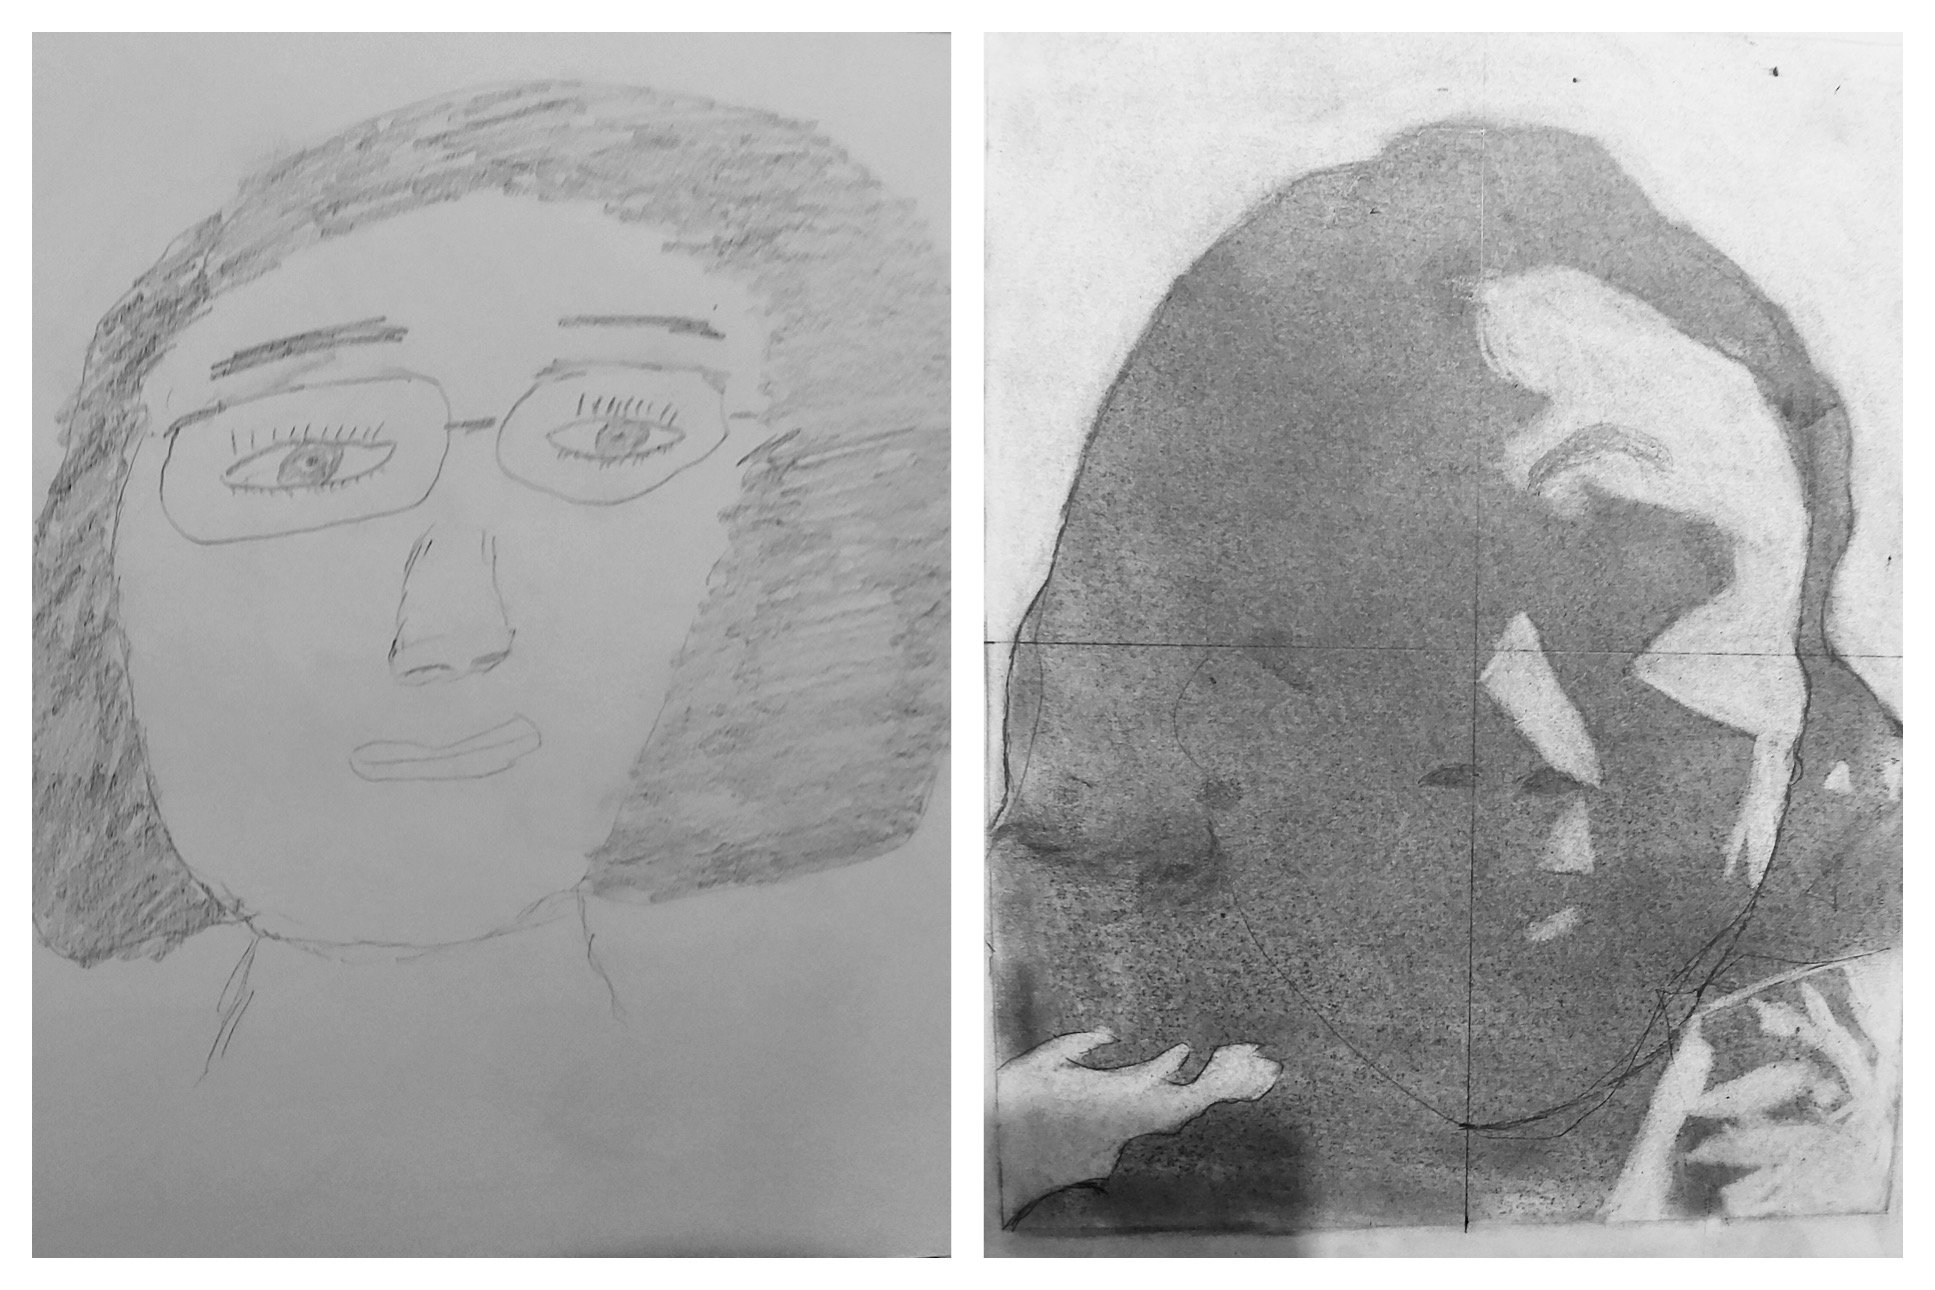 Nora’s Before and After Self-Portraits